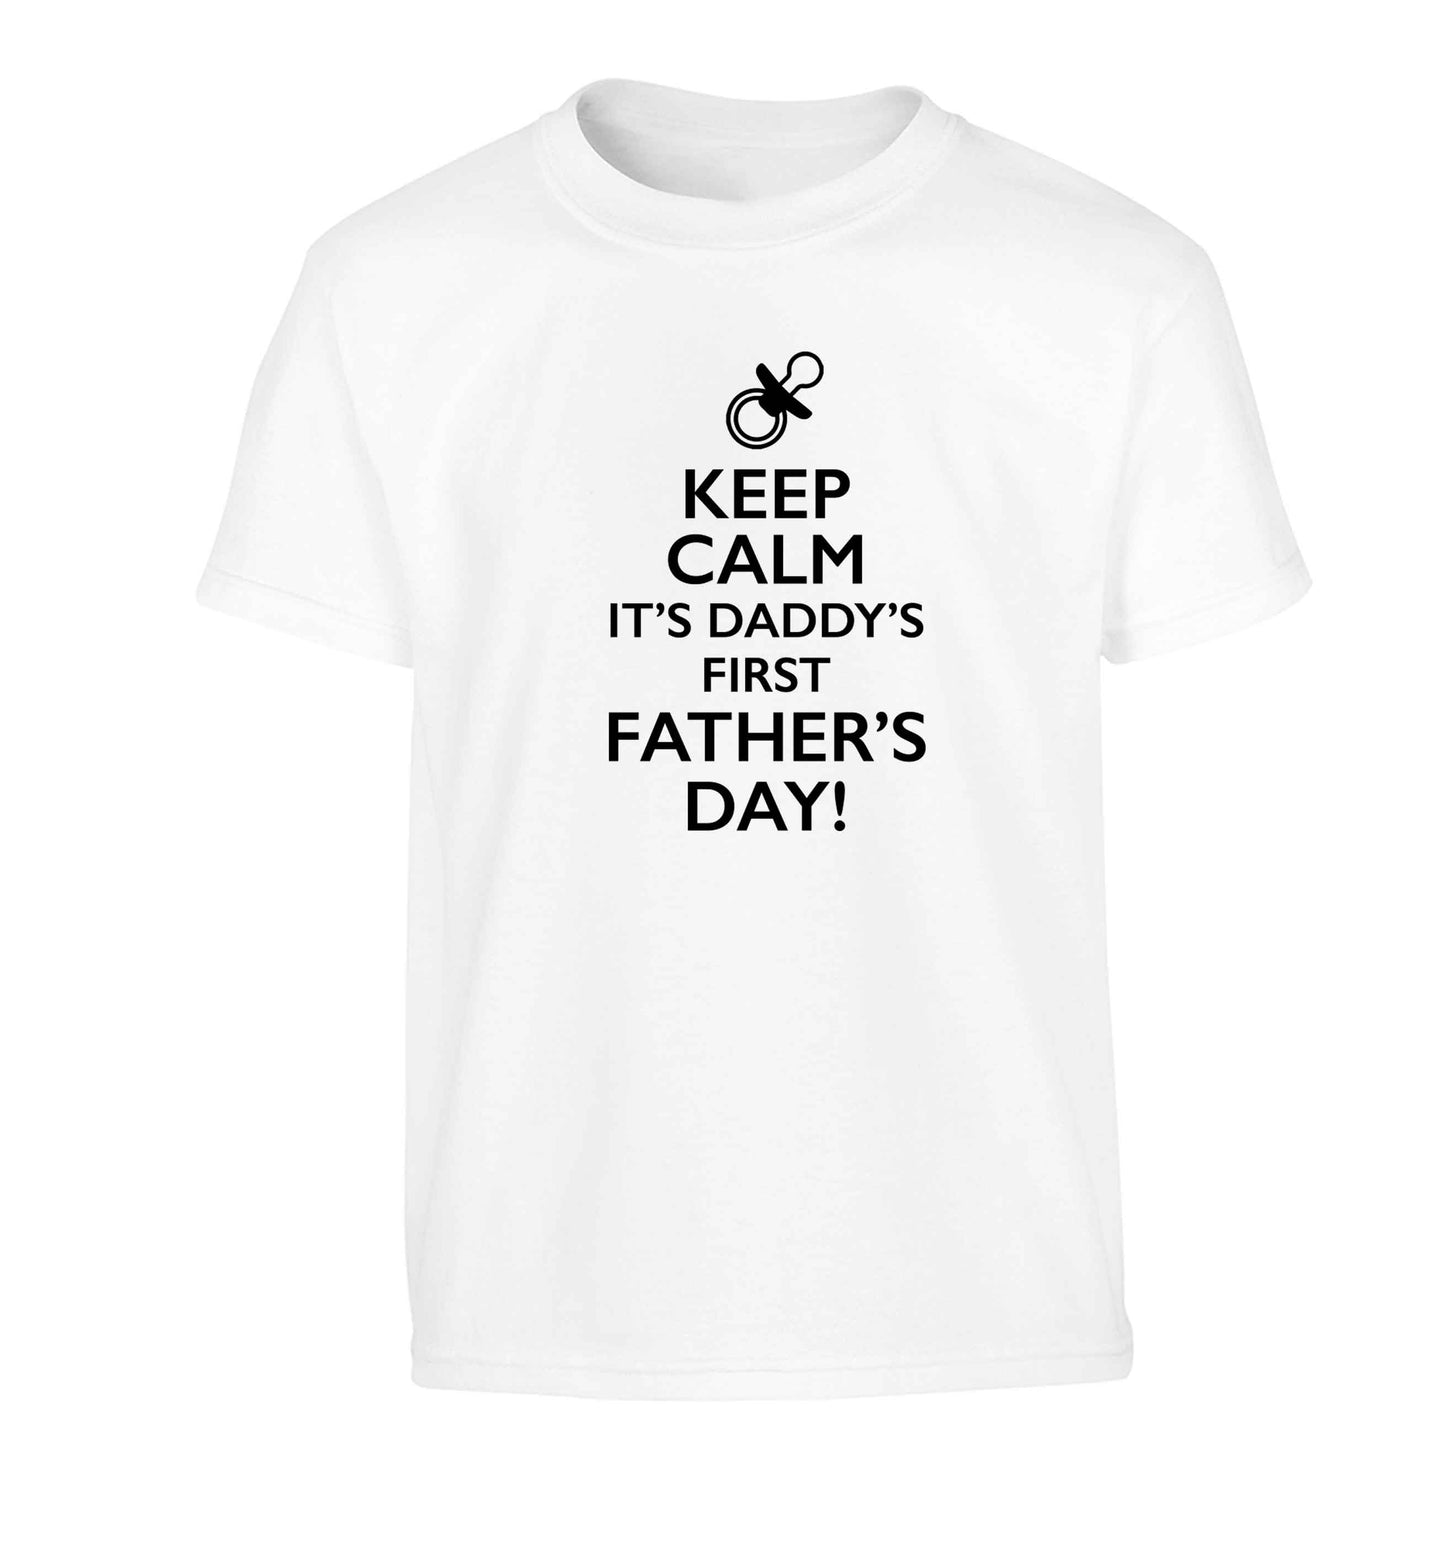 Keep calm it's daddys first father's day Children's white Tshirt 12-13 Years